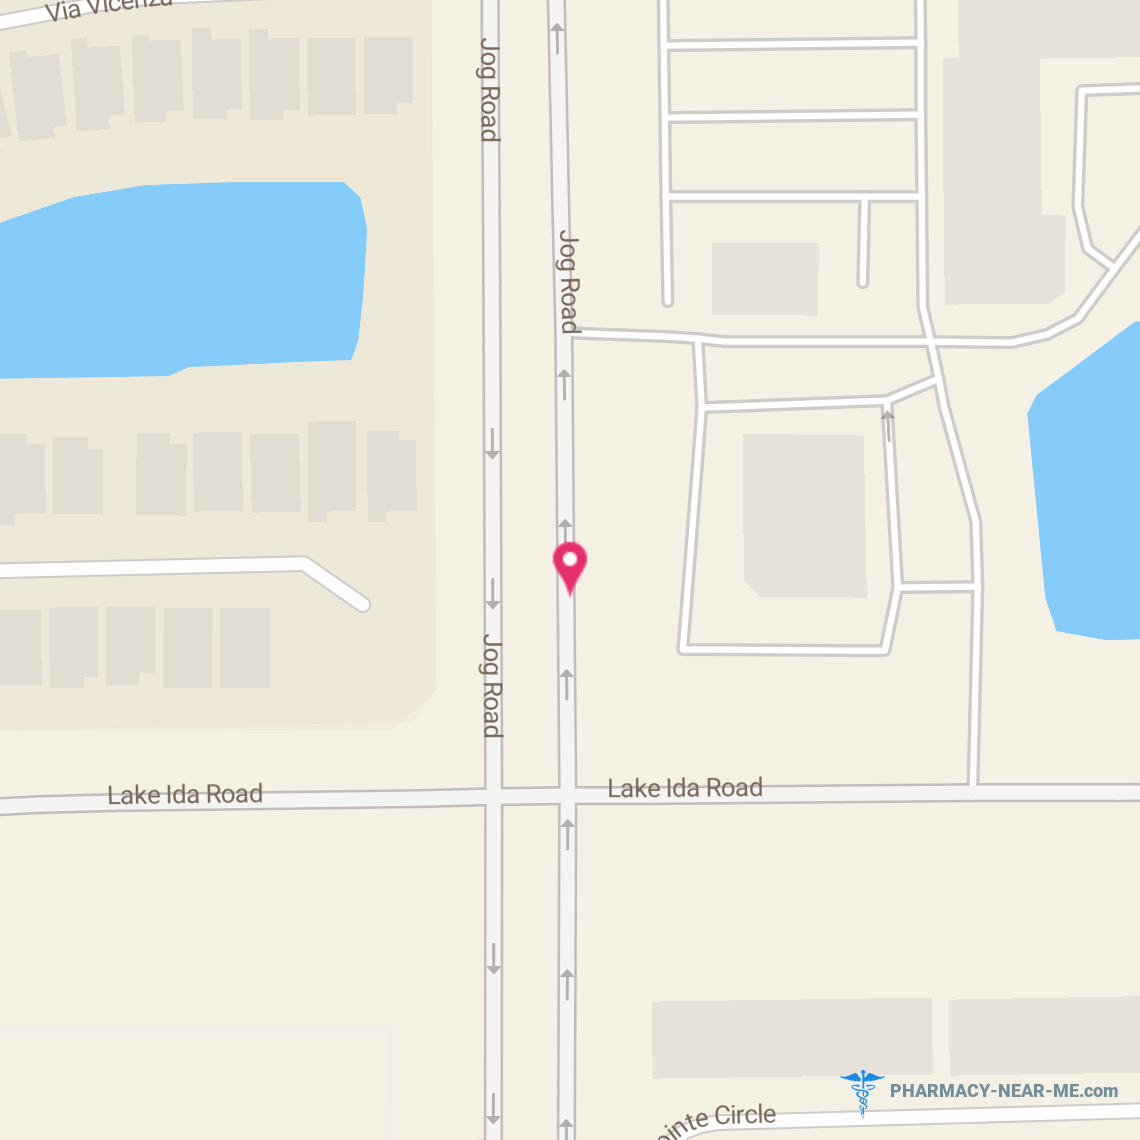 WALGREENS #5681 - Pharmacy Hours, Phone, Reviews & Information: 13950 S Jog Rd, Delray Beach, Florida 33446, United States